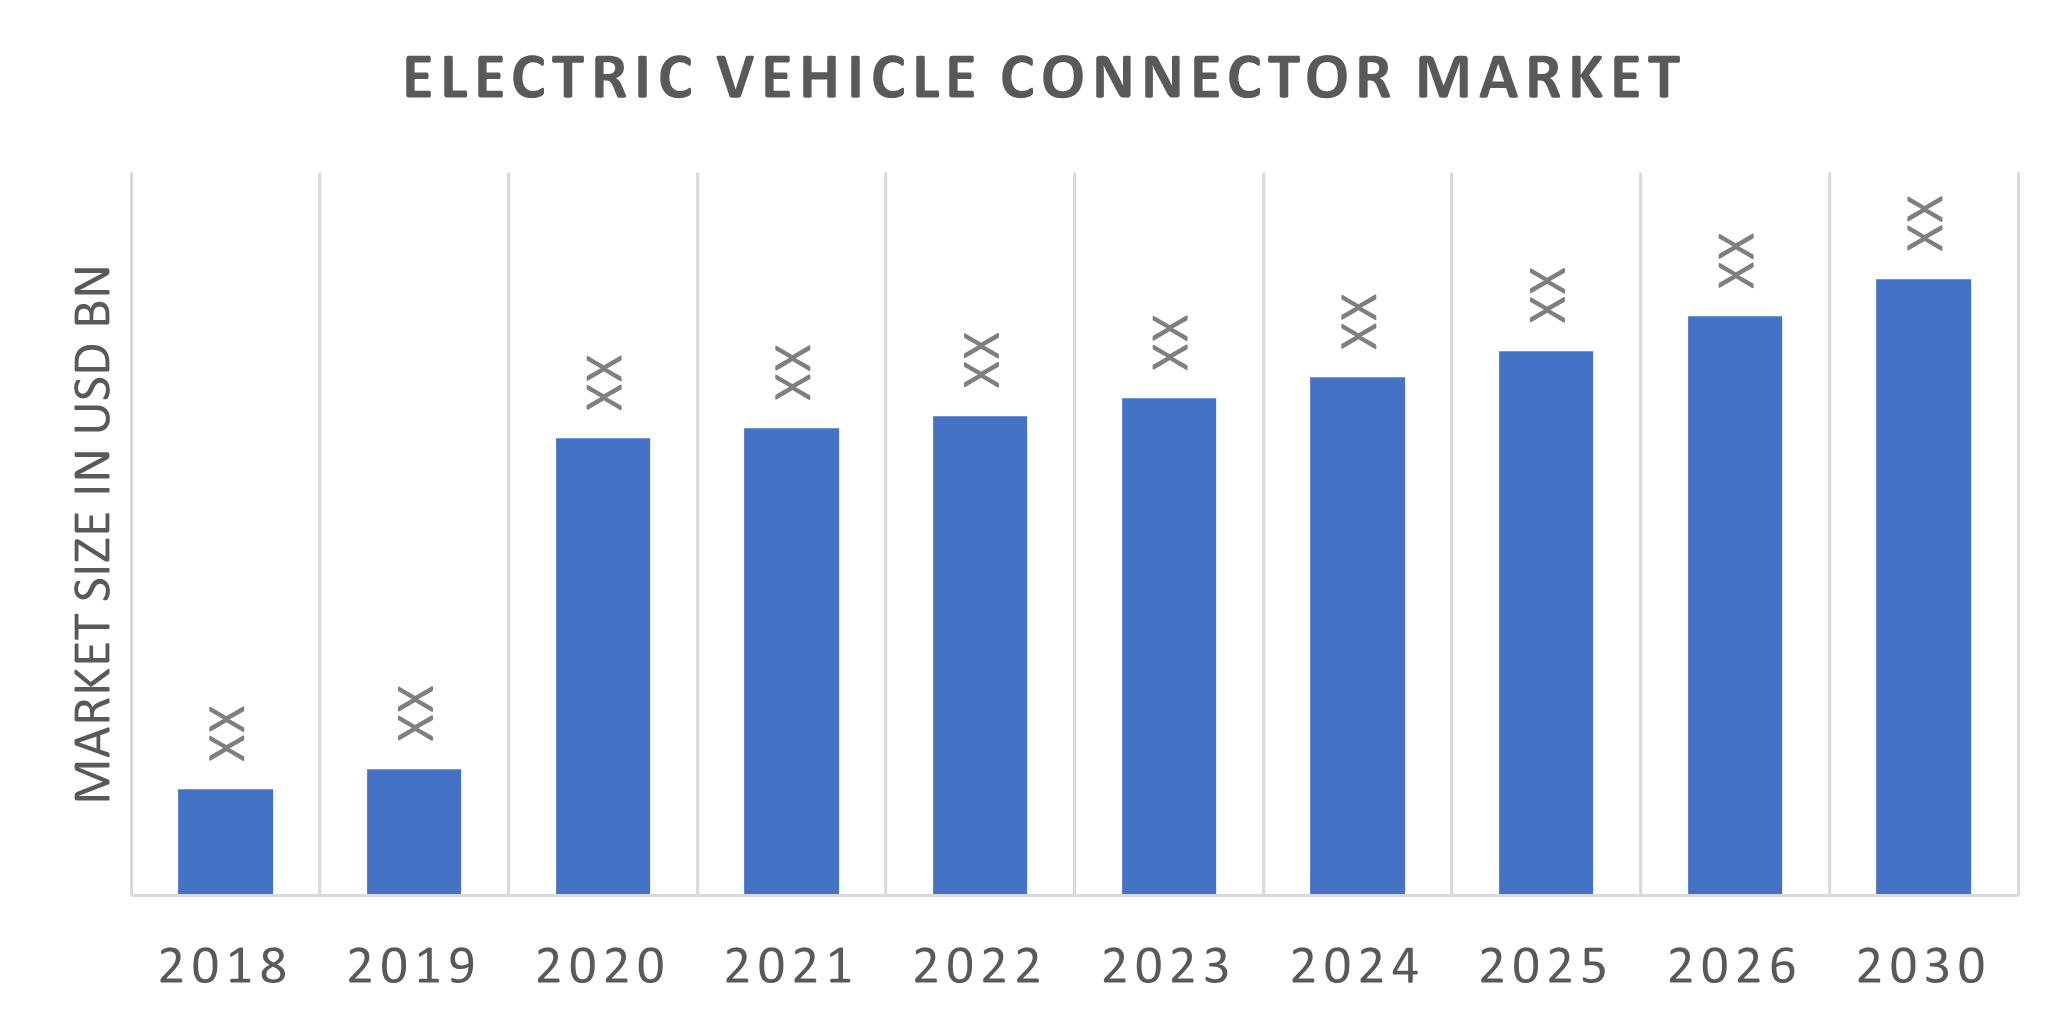 Electric Vehicle Connector Market Overview